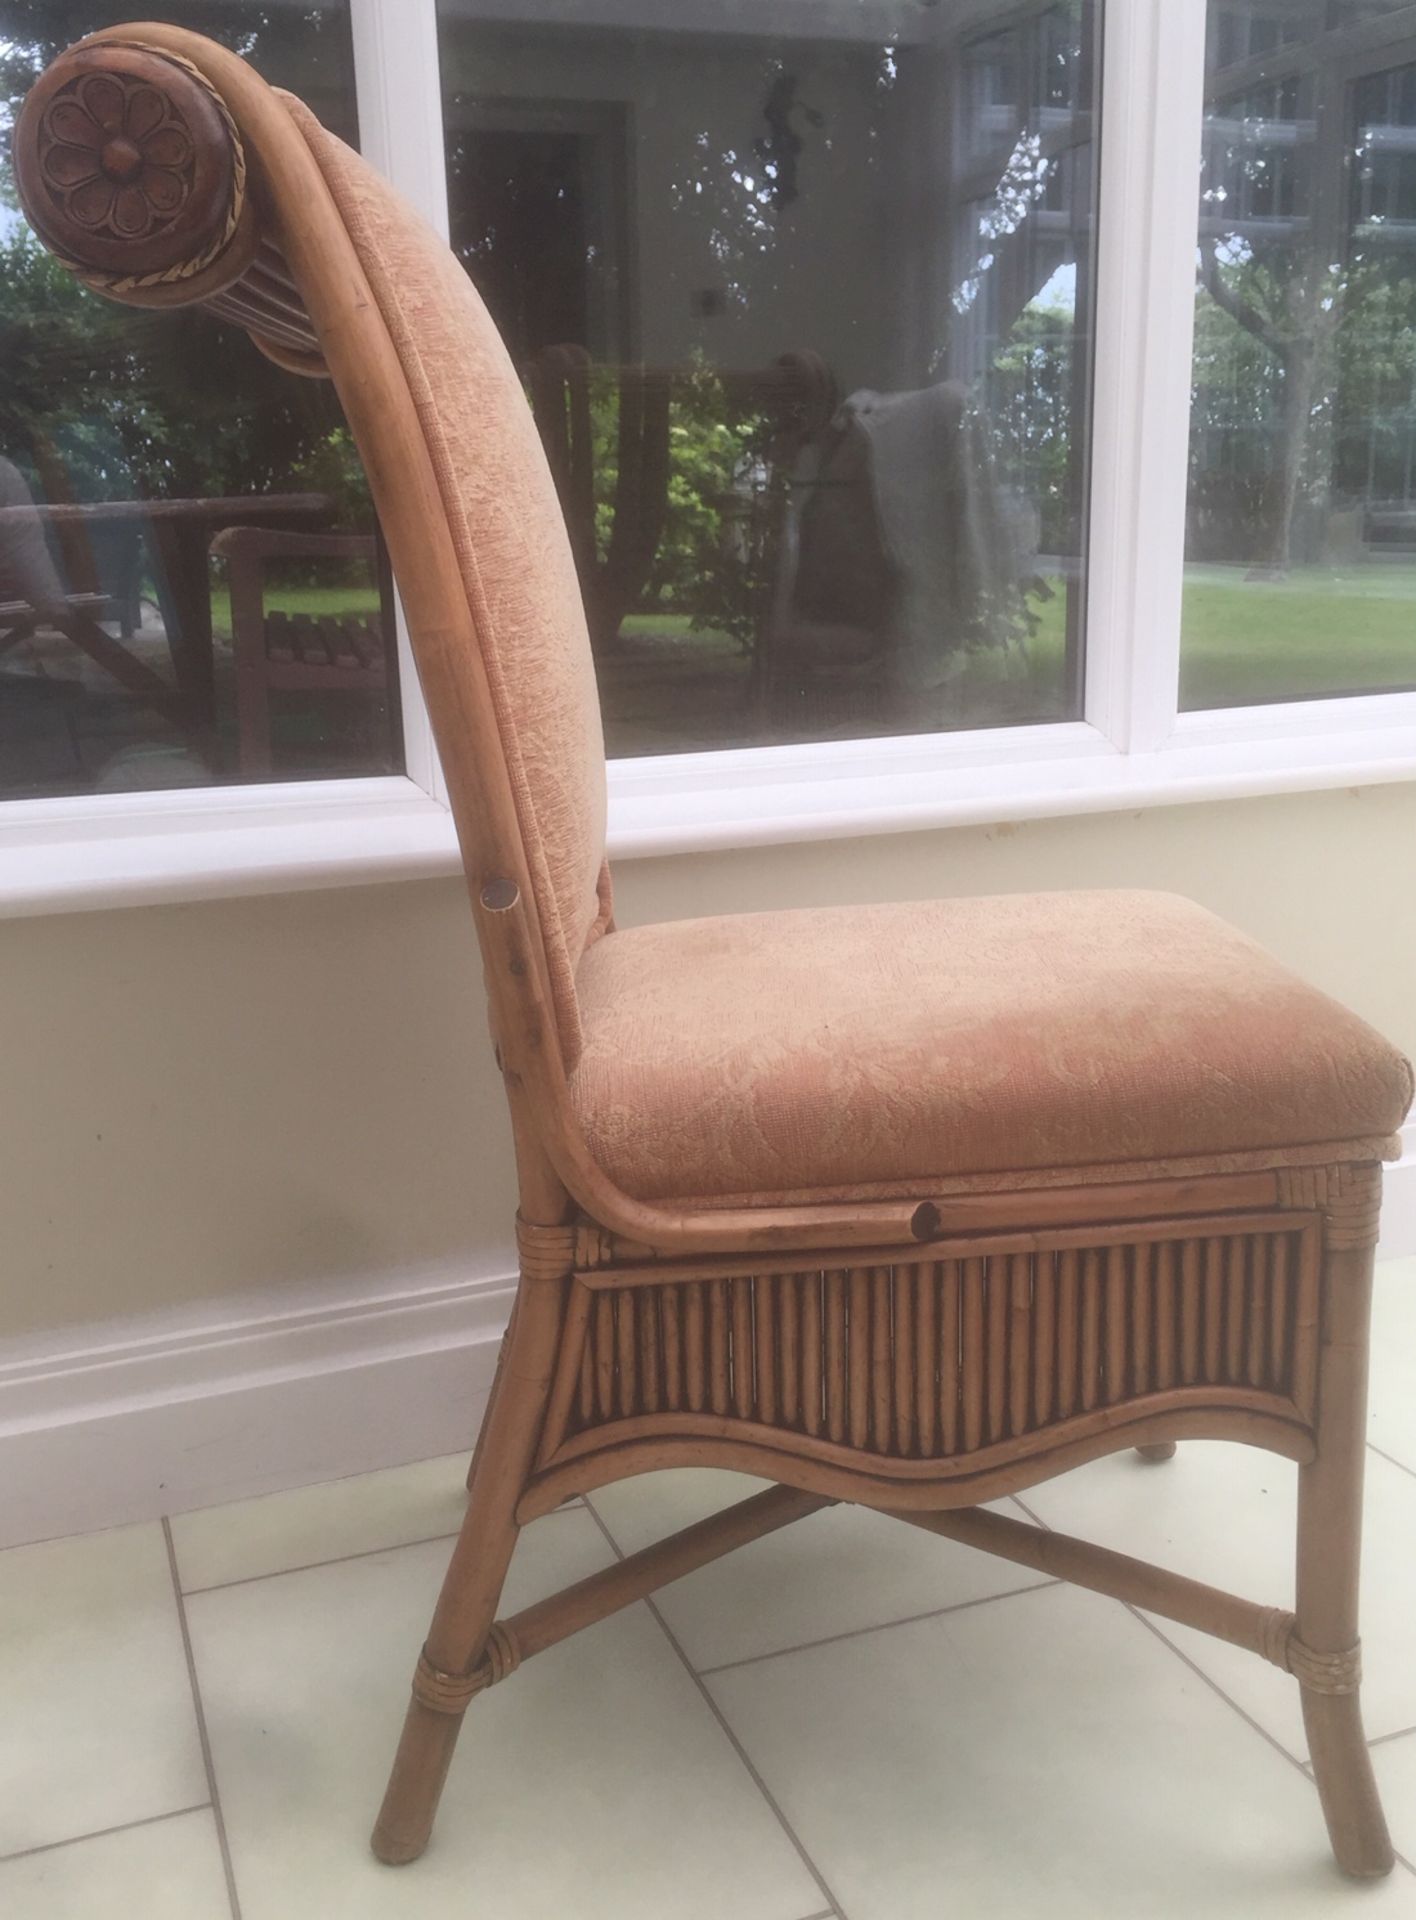 A Set Of 6 x Matching Upholstered High Back Bamboo Chairs - In Very Good Condition - CL535 - Ref: UN - Image 2 of 2